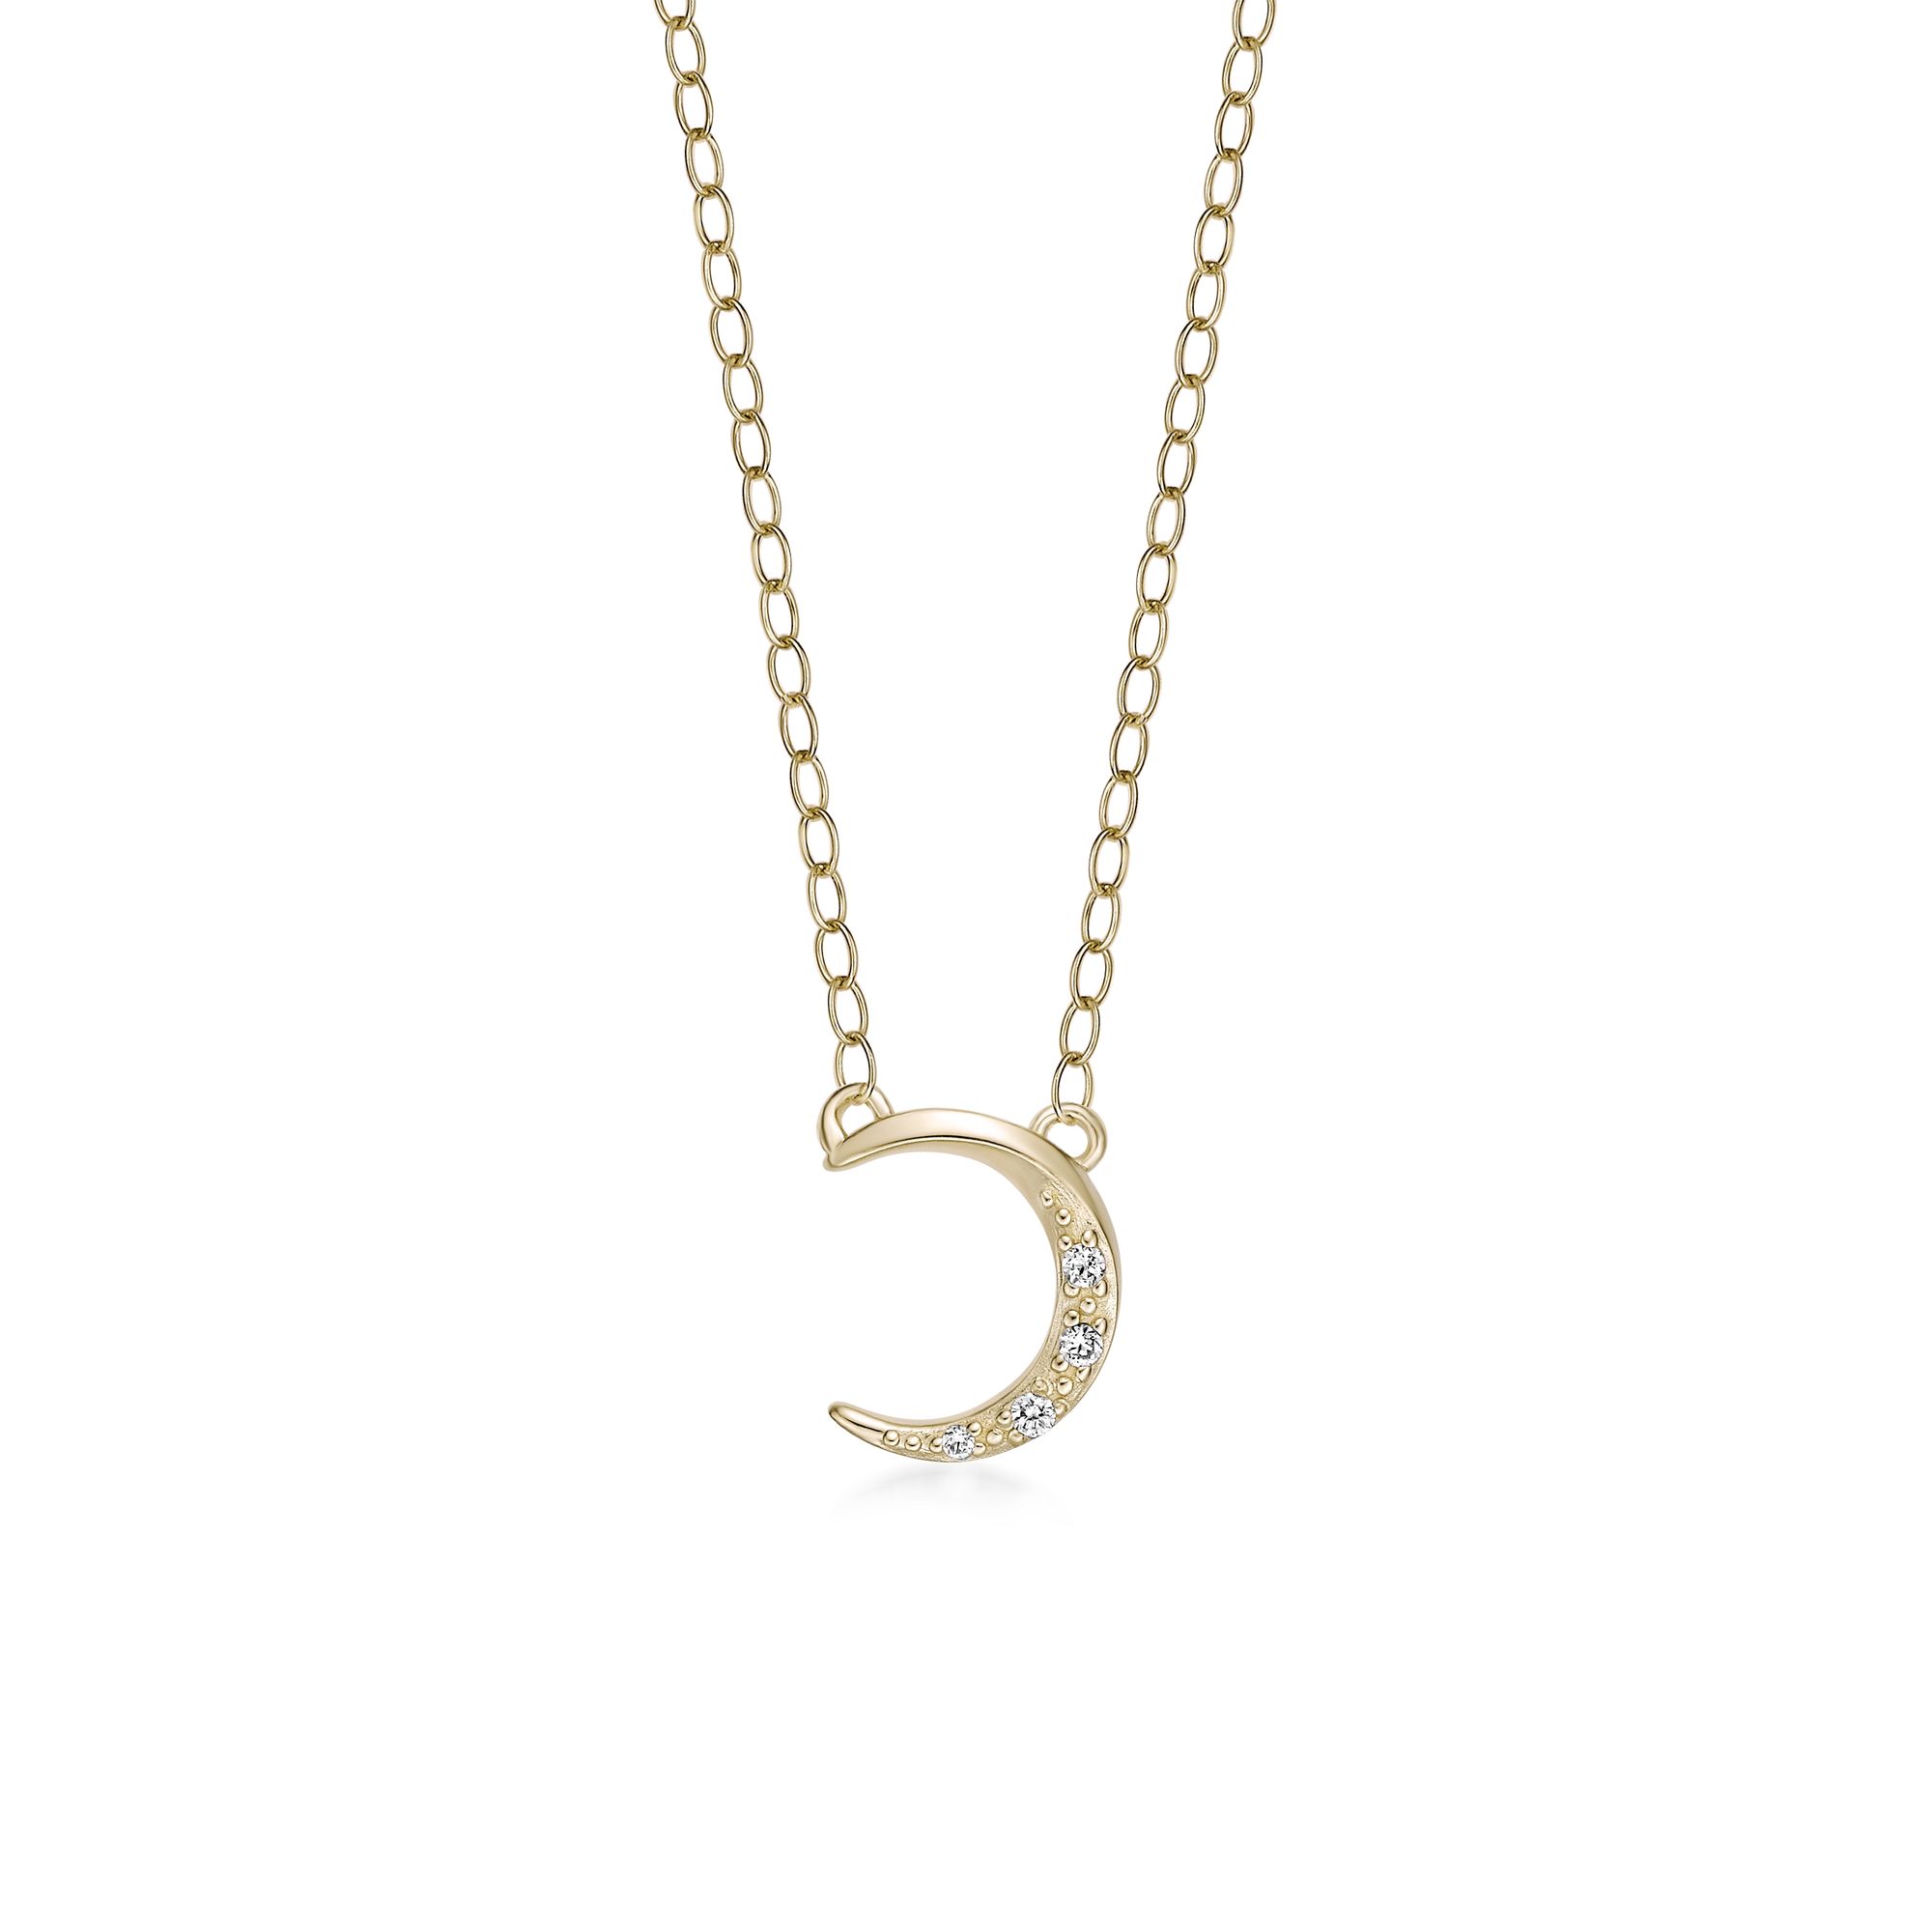 Women's Lab Grown Diamond Moon Necklace in 18K Yellow Gold-Plated Sterling Silver with Spring Ring Clasp, 0.03 Carat, 18" Link Chain | Lavari Jewelers